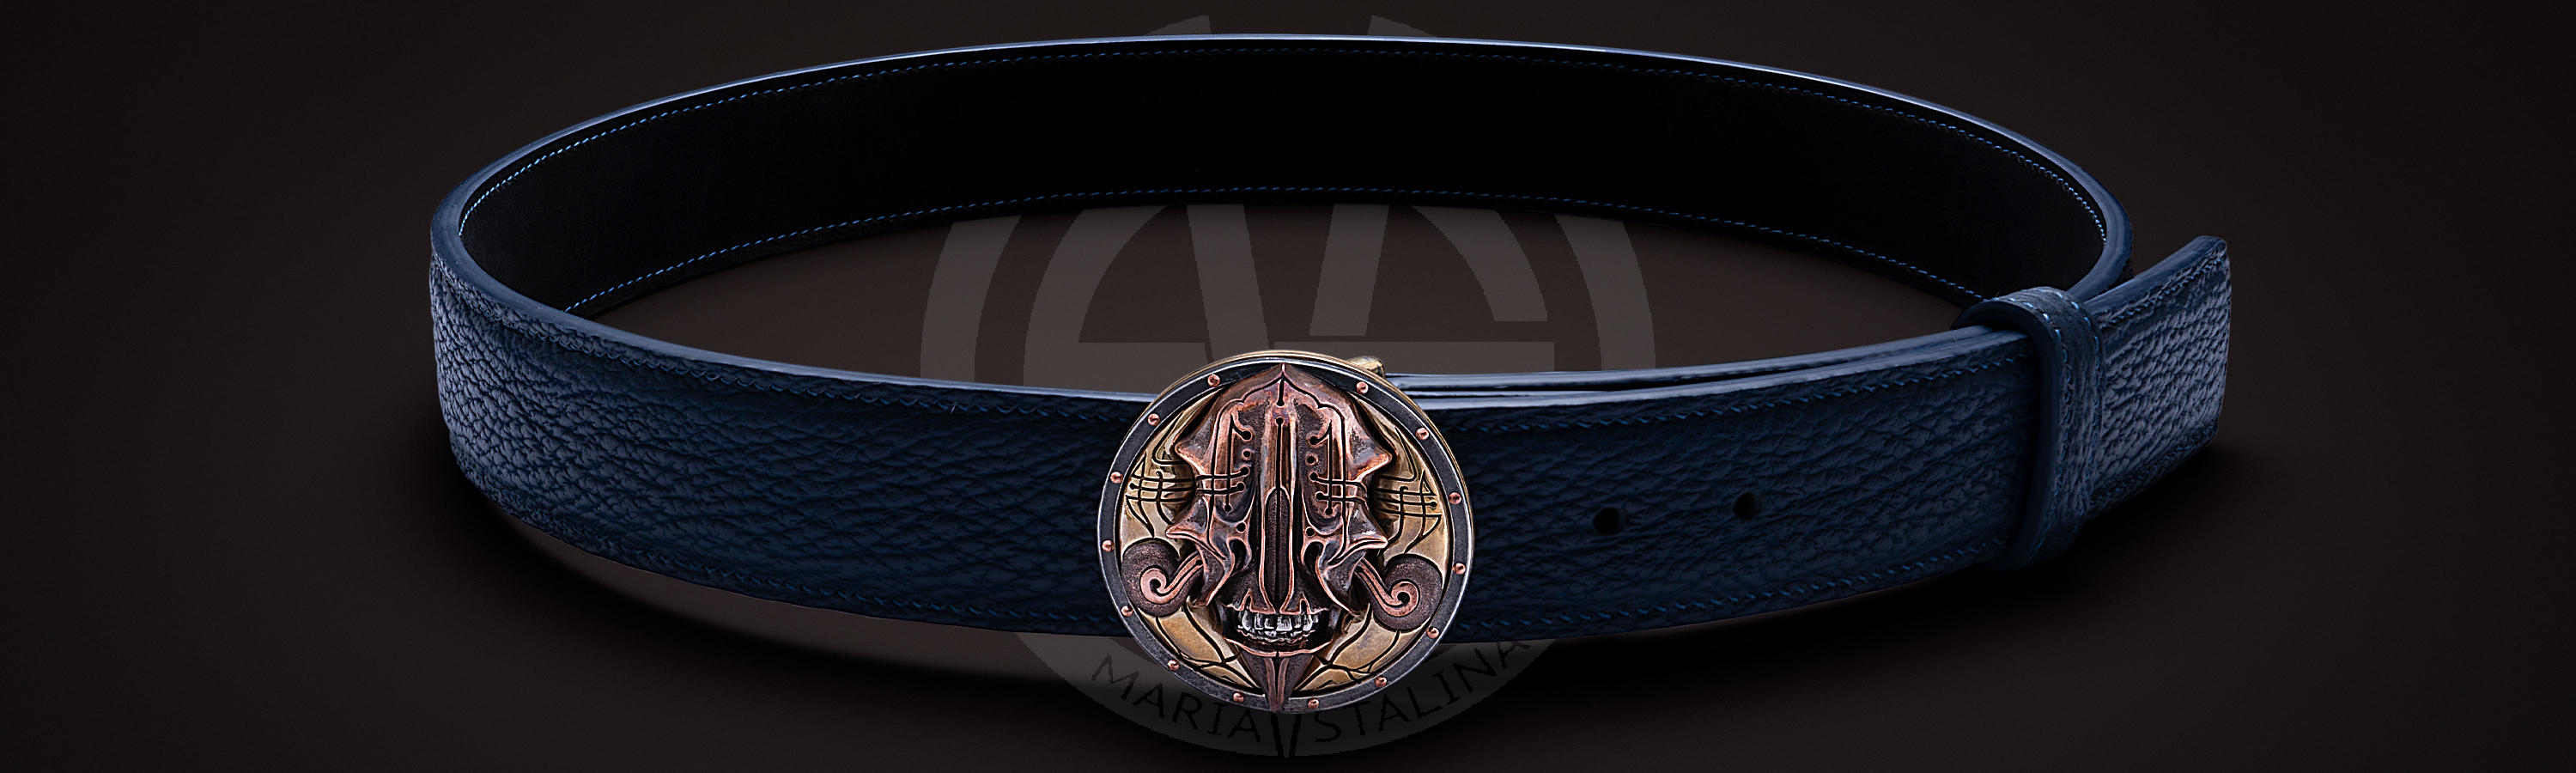 Men's belt with the author's buckle 